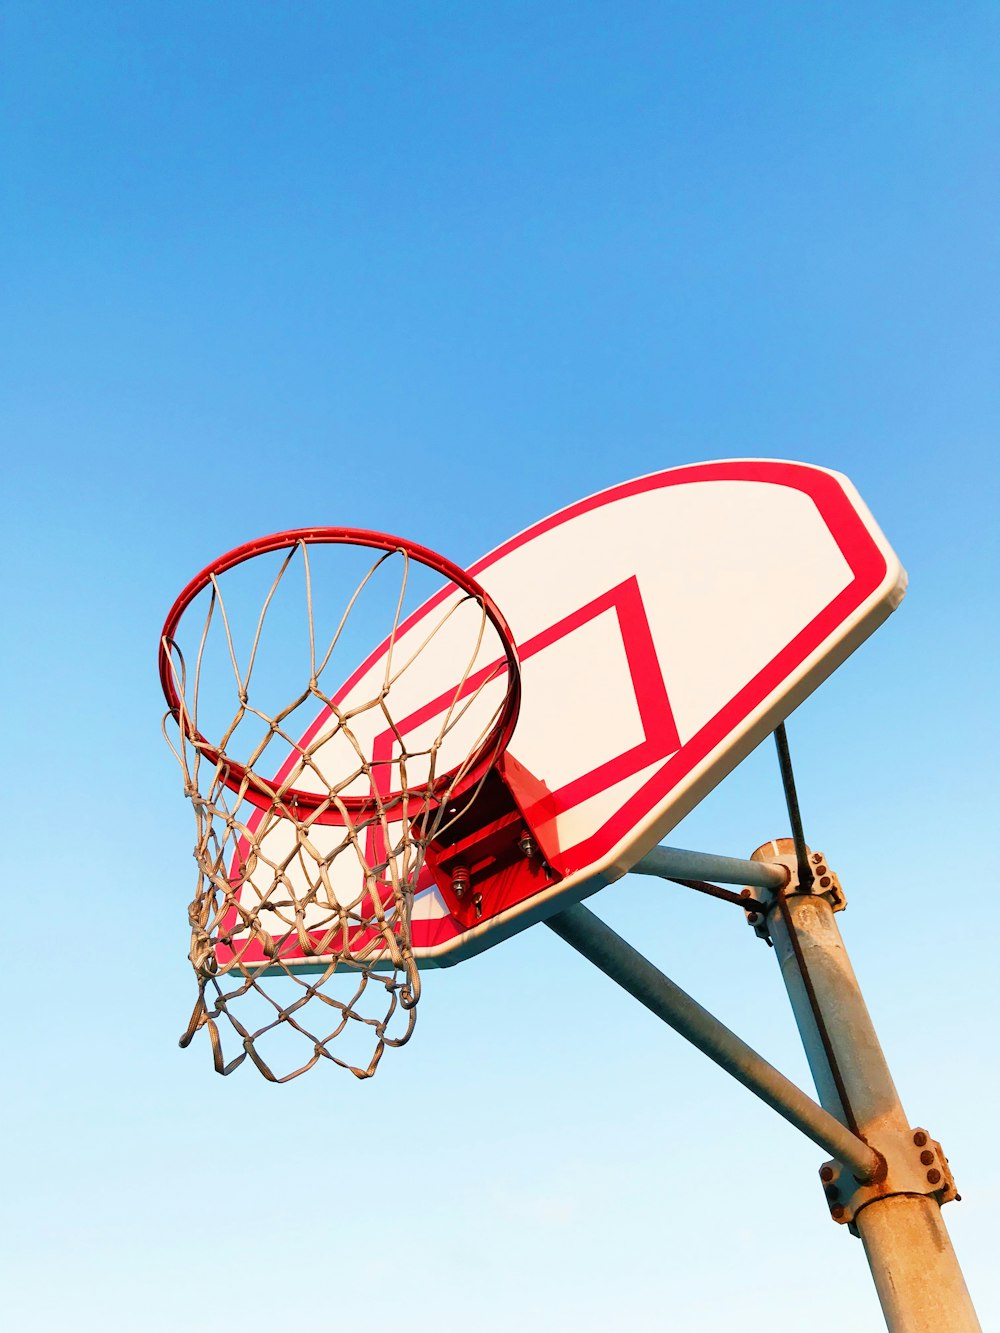 low-angel photography of white and red basketball hoop during daytime